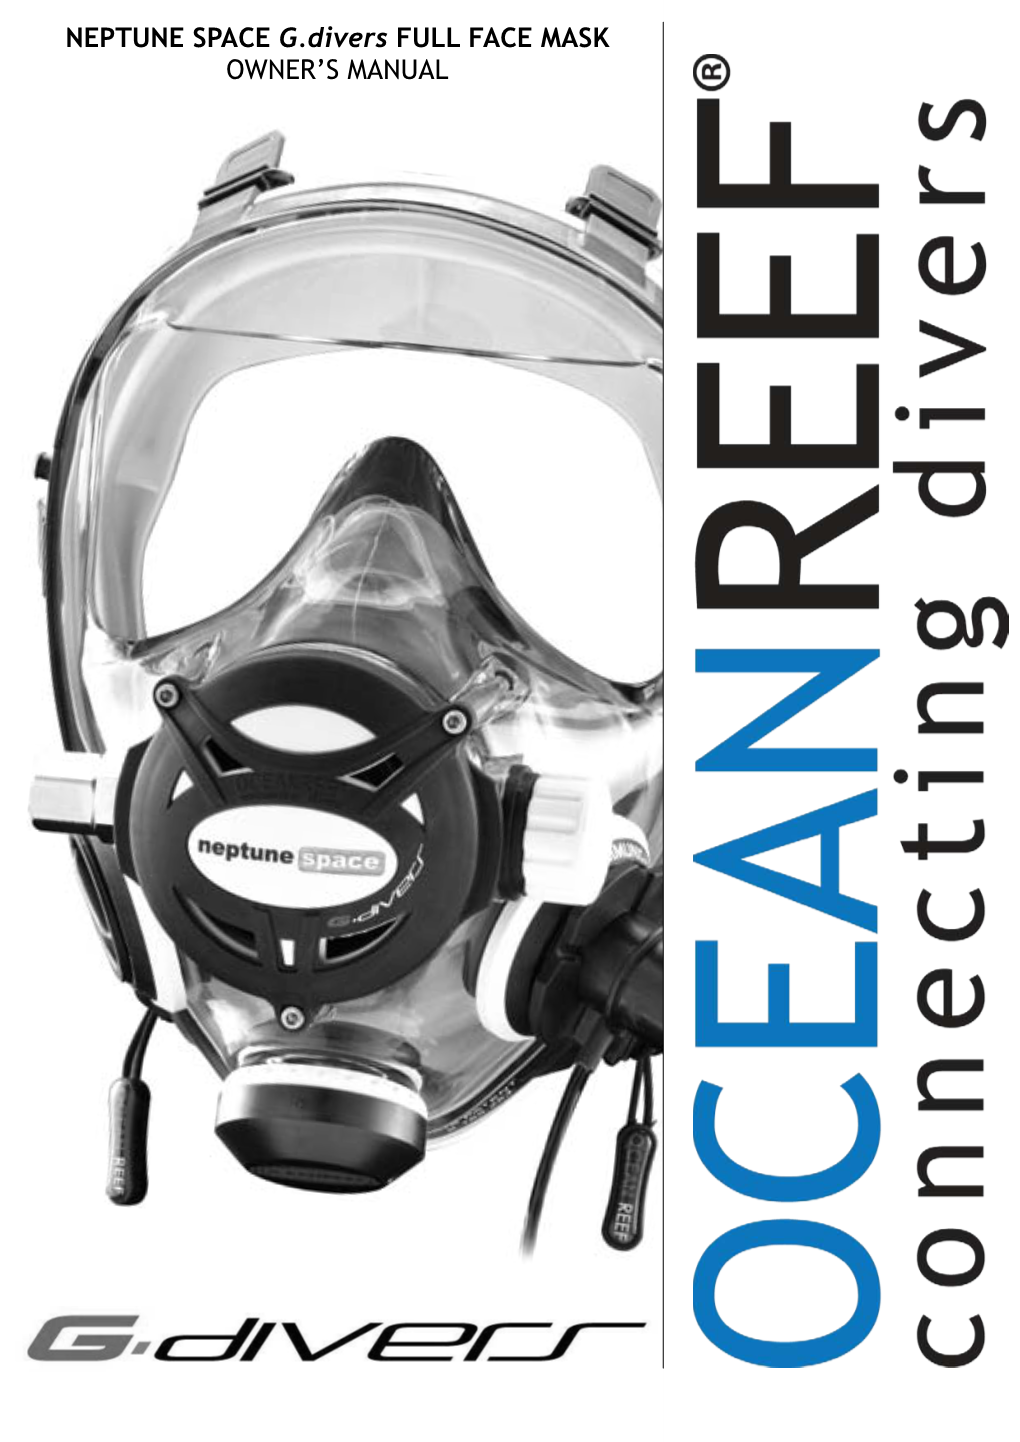 NEPTUNE SPACE G.Divers FULL FACE MASK OWNER’S MANUAL